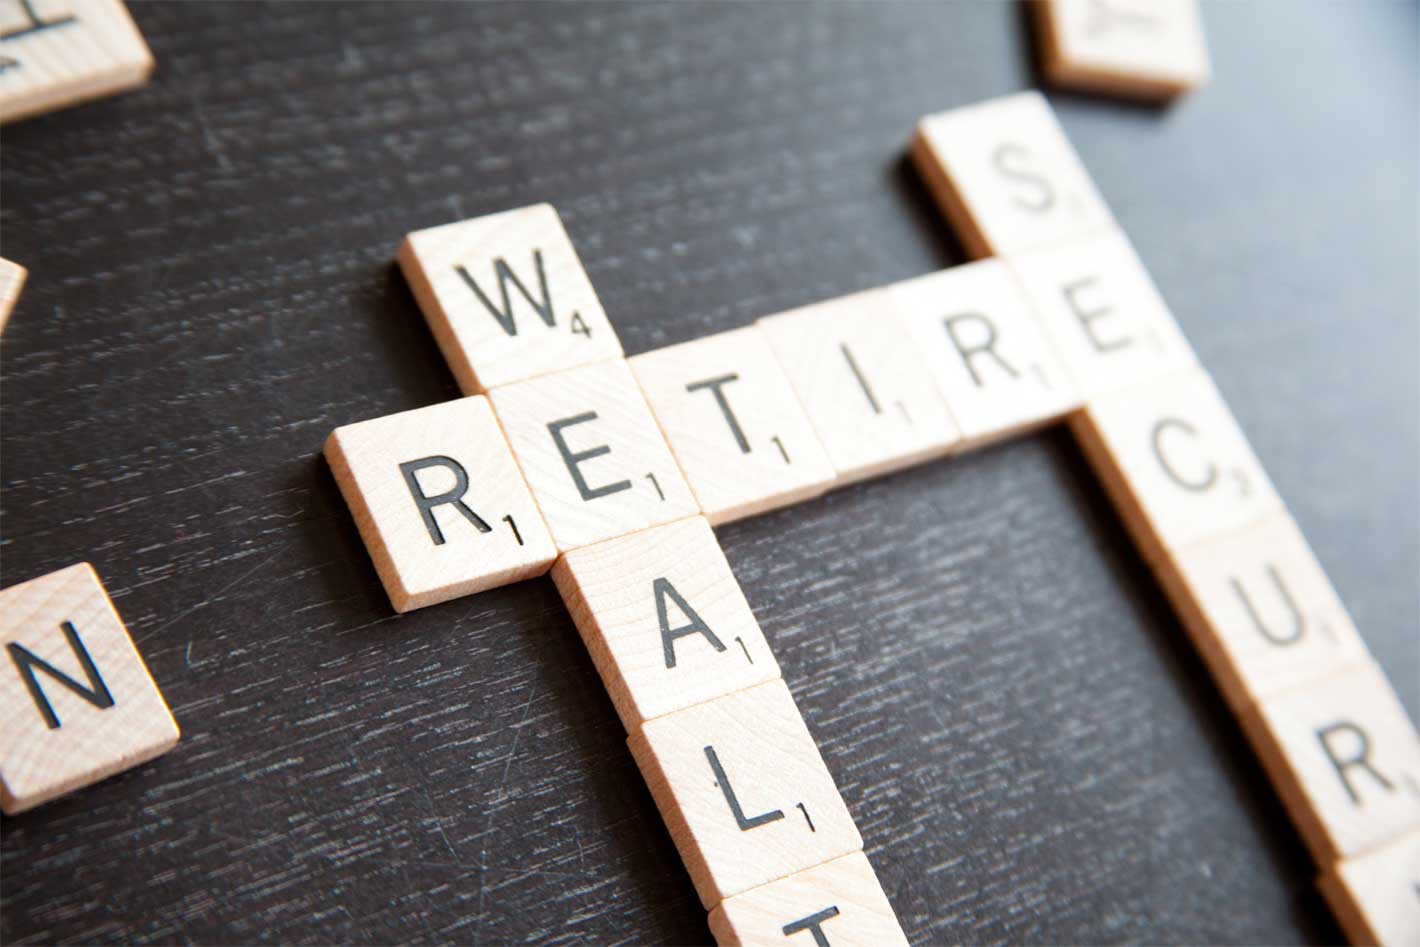 Pensions and retirement plan